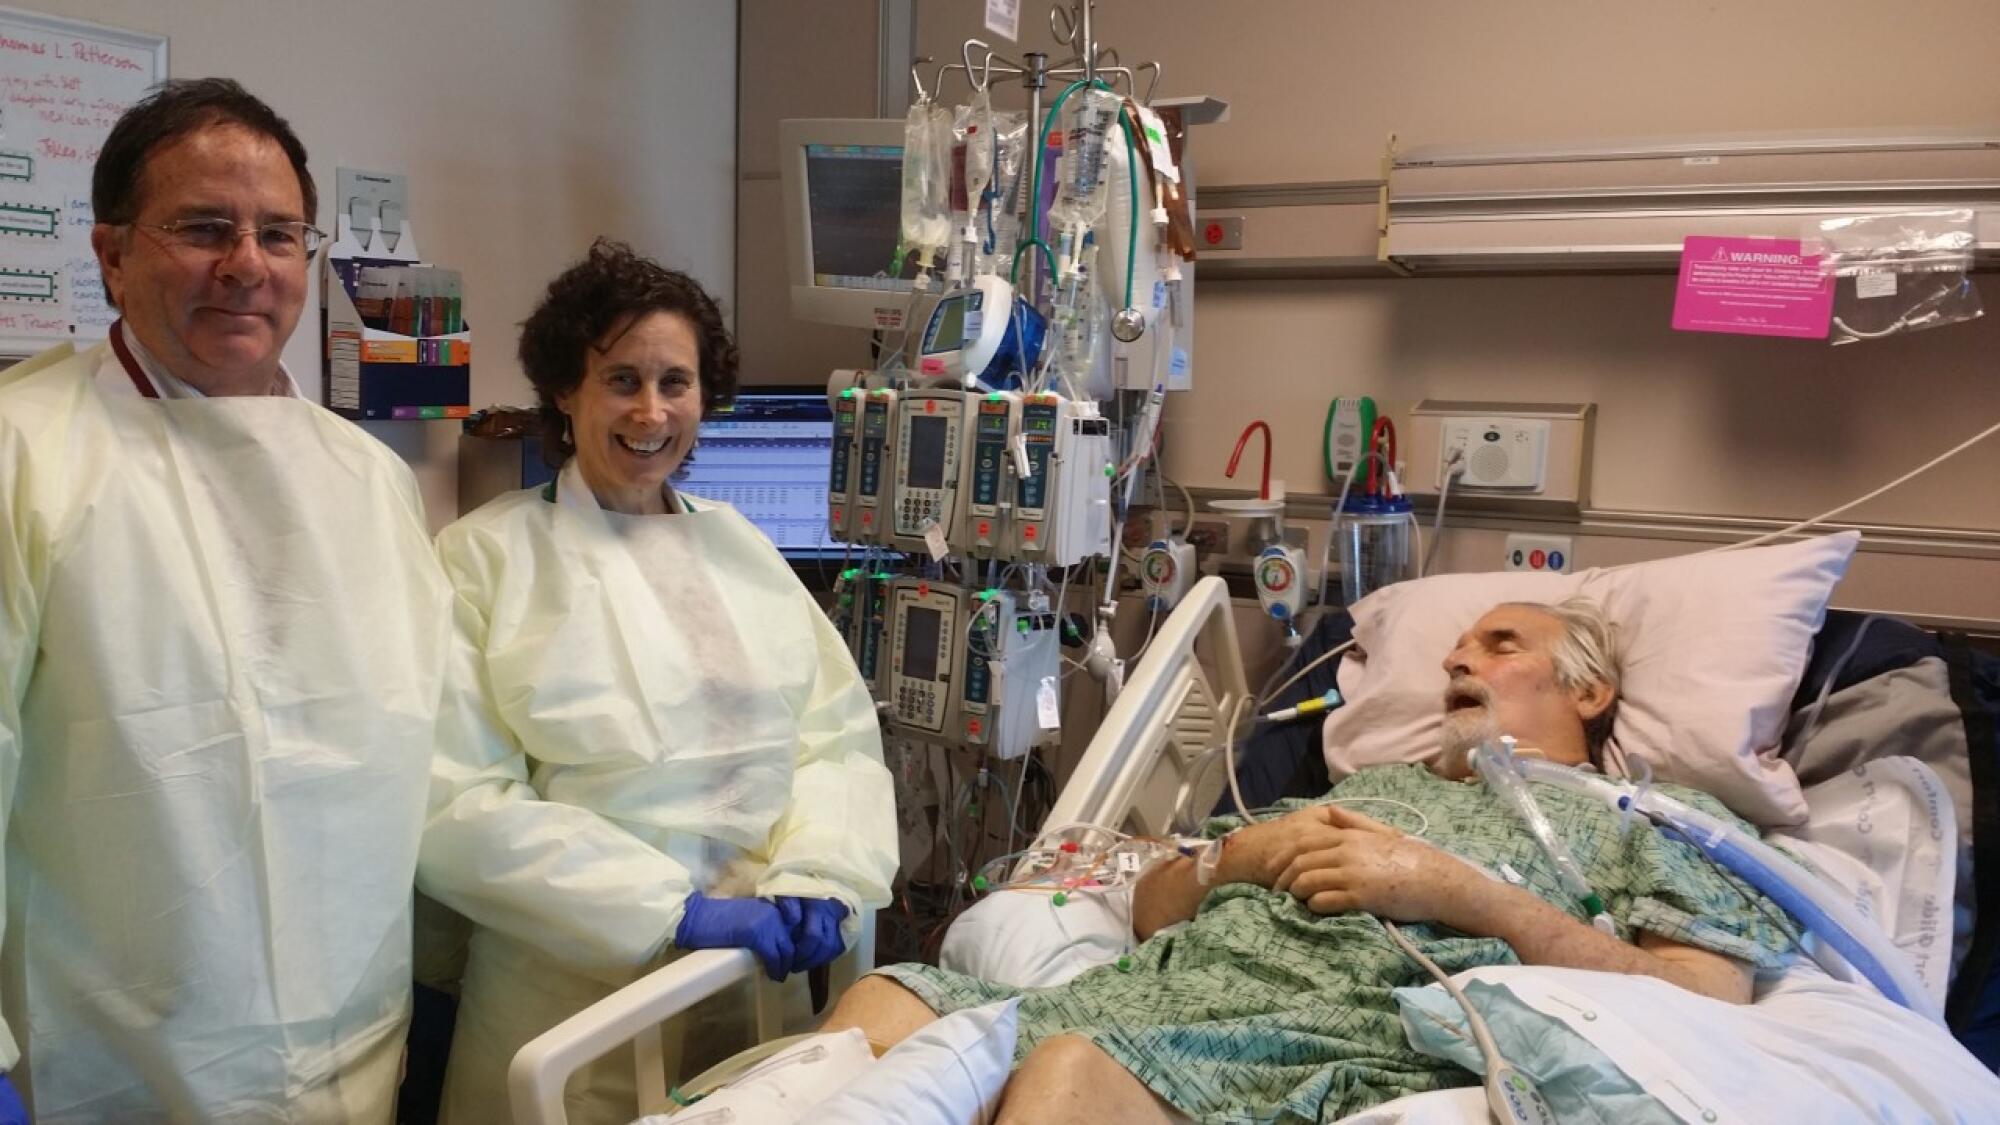 Chip Schooley (left) and Dr. Randy Taplitz helped save UCSD researcher Tom Patterson (in bed) in 2016.